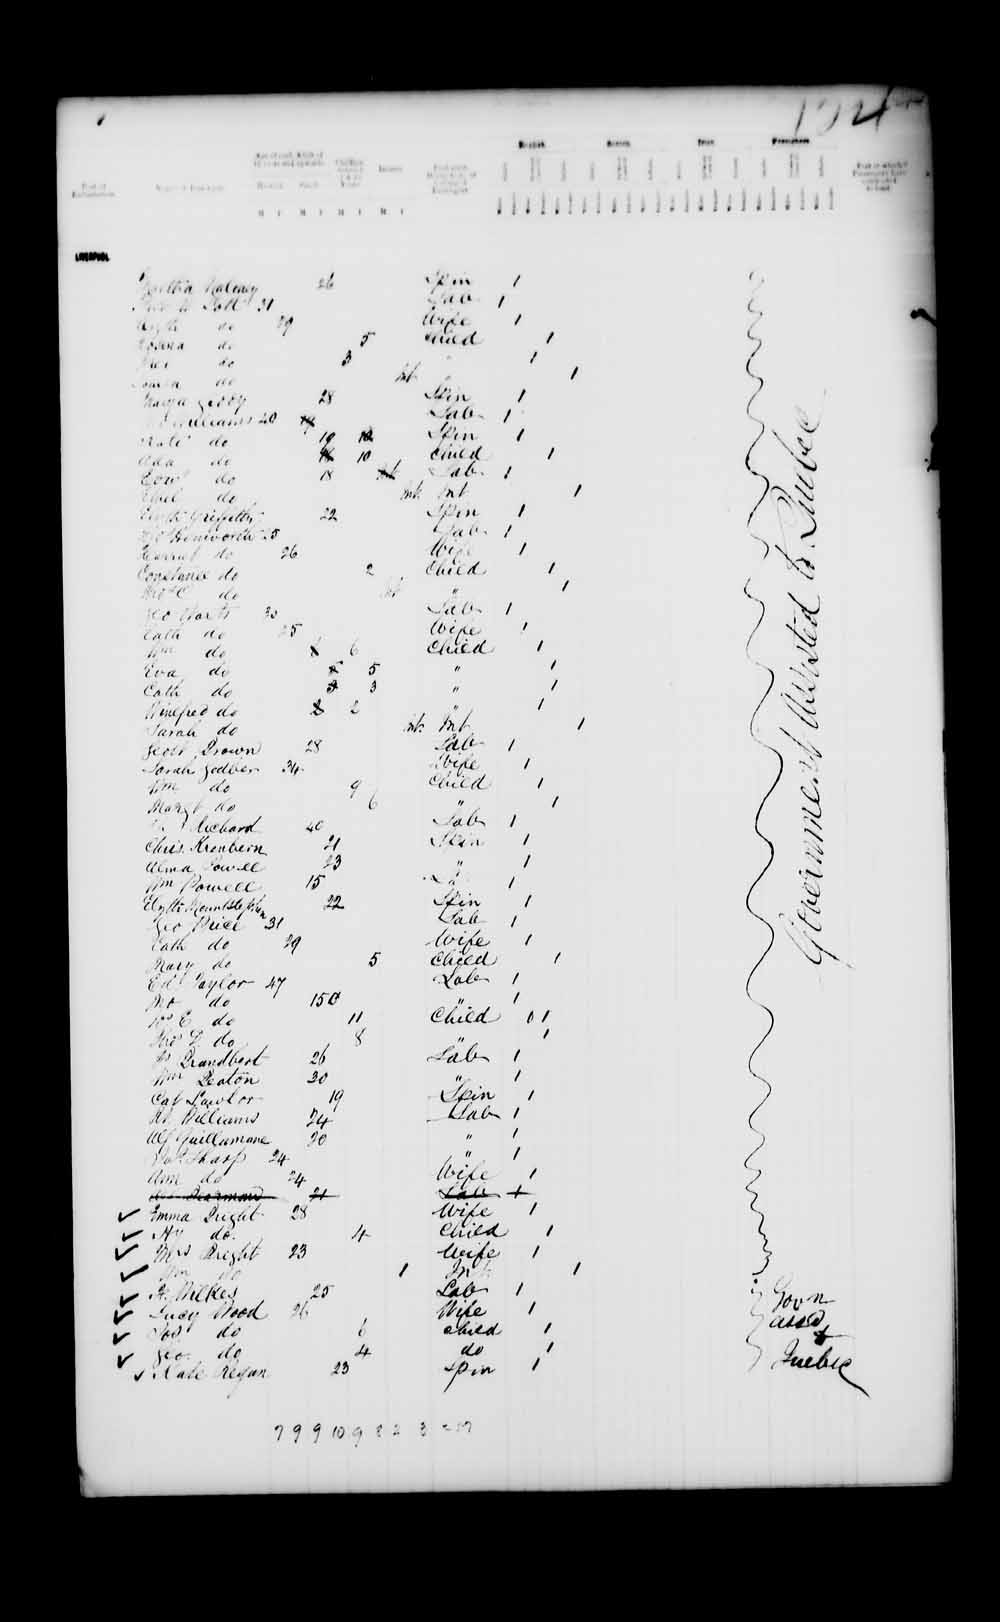 Digitized page of Passenger Lists for Image No.: e003541214